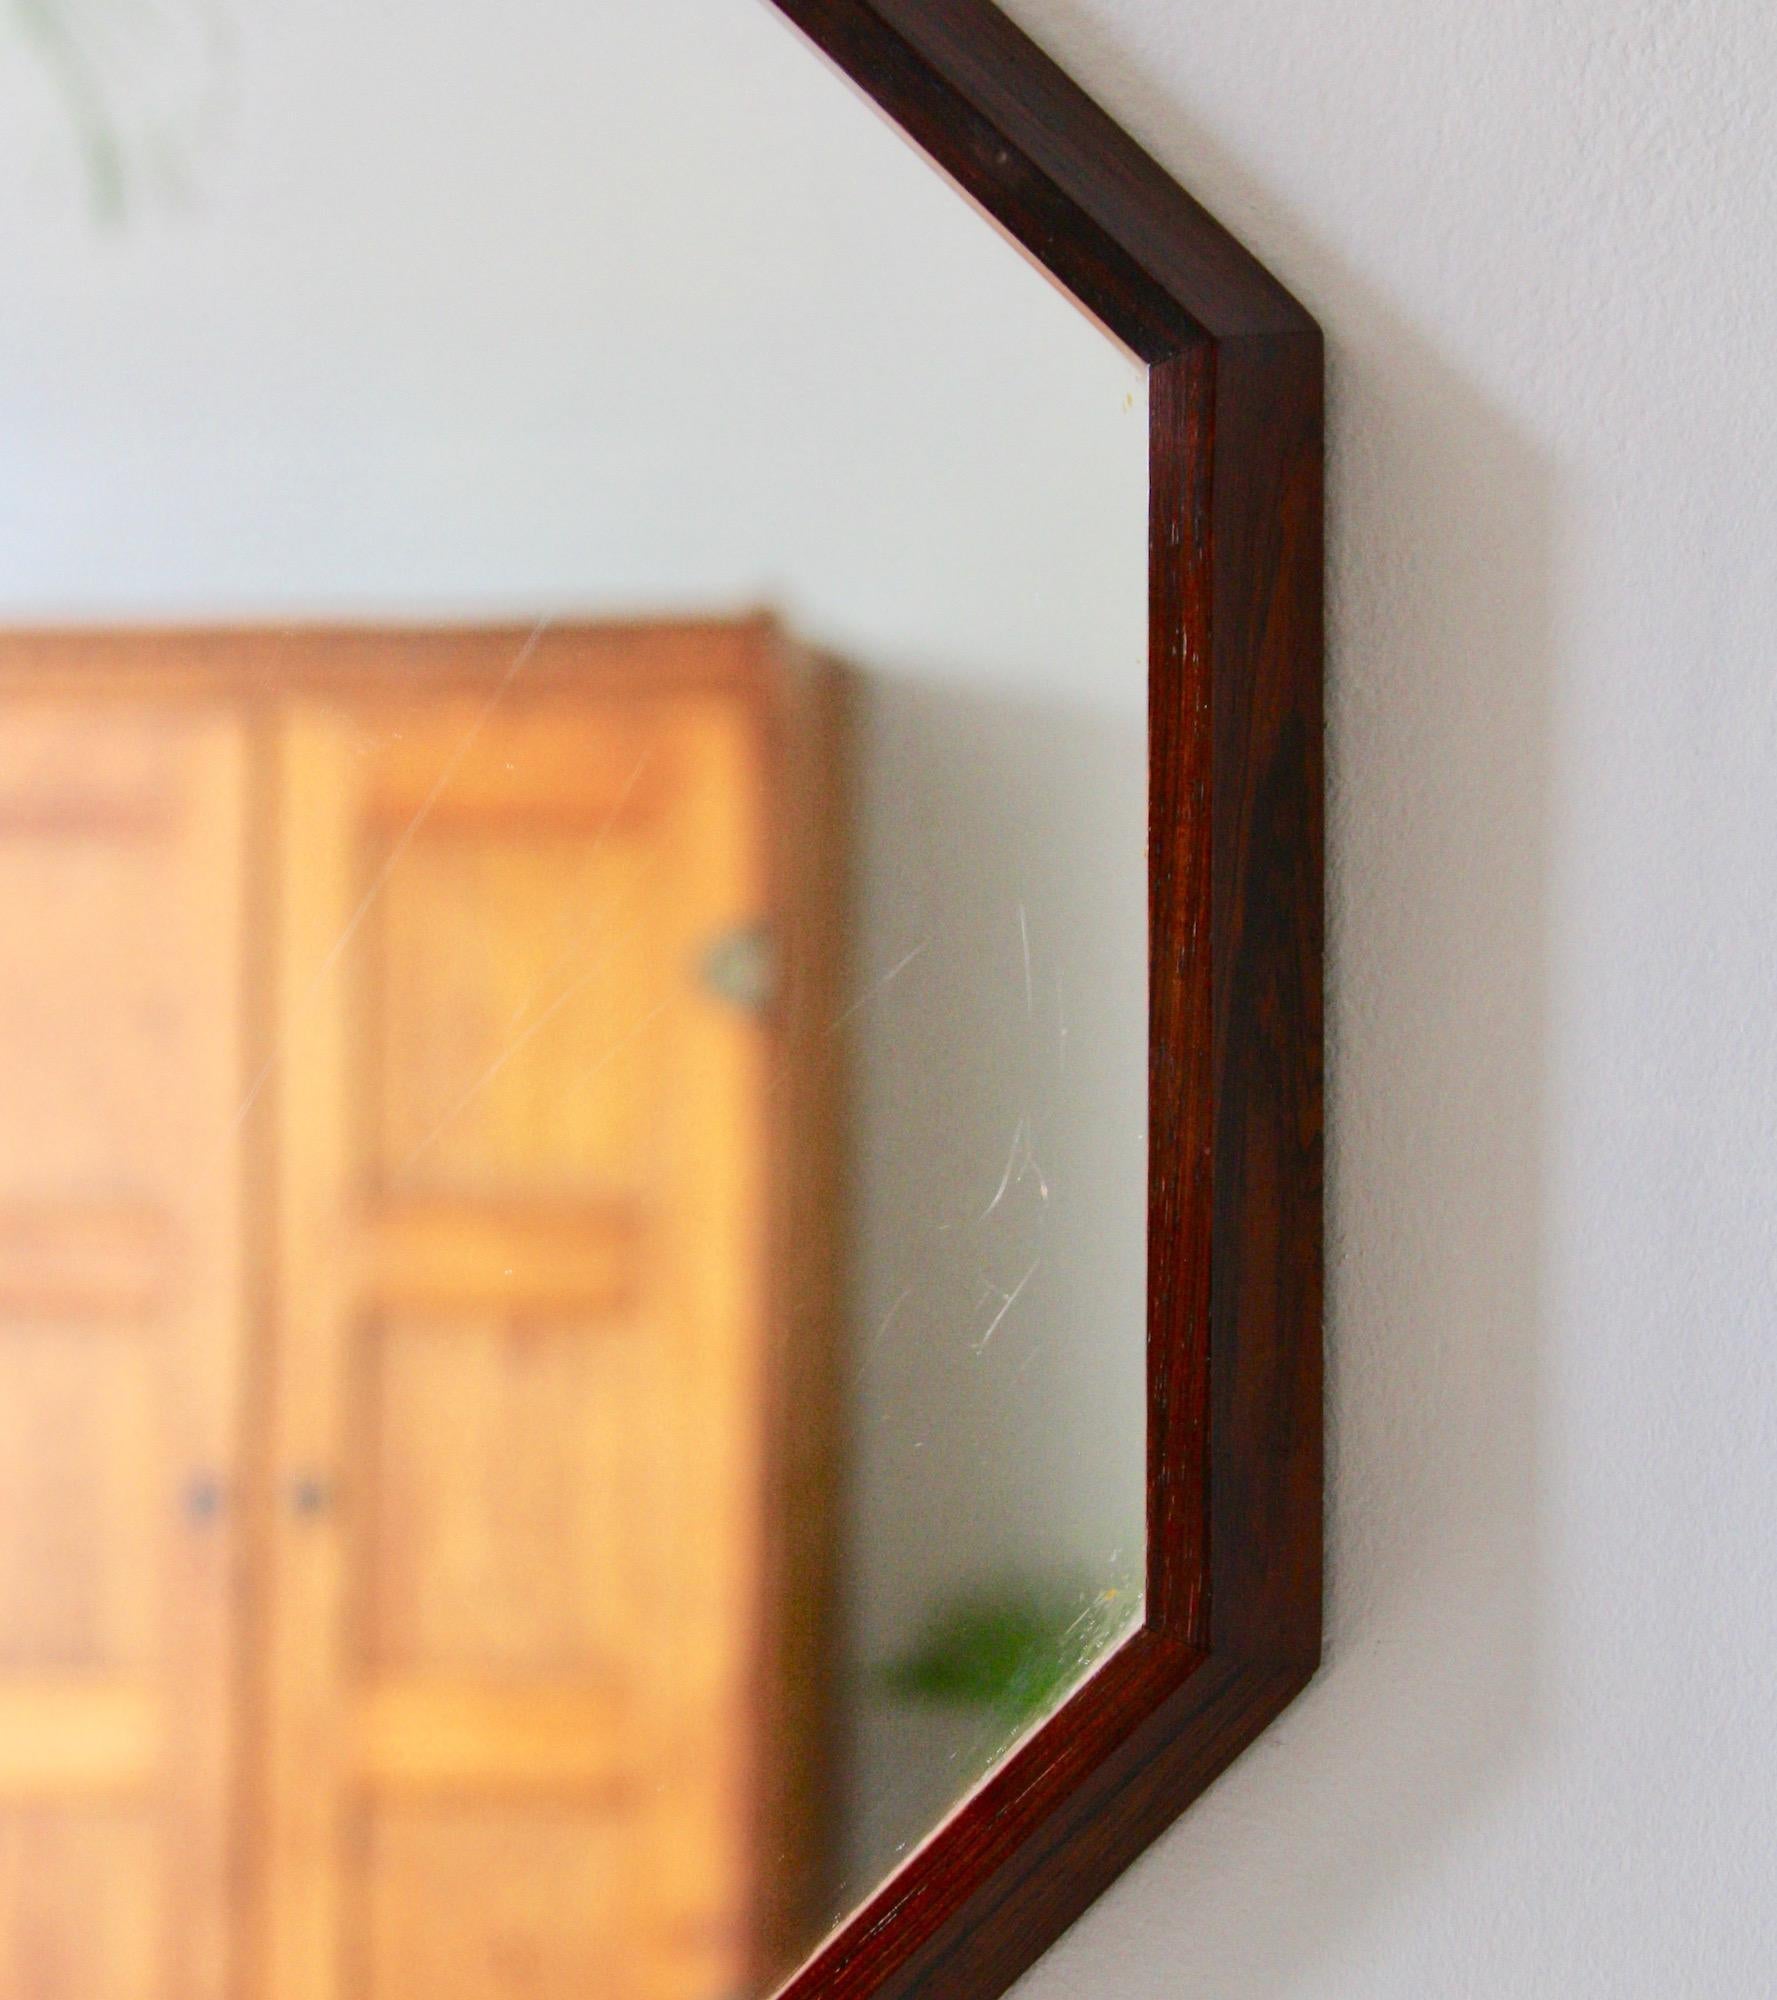 Danish vintage wall mirror dating back to 1950s. With a wooden frame tapered to a point hangs with a metal hook on the back of the frame. The mirror is made of solid rosewood. In excellent condition.
  